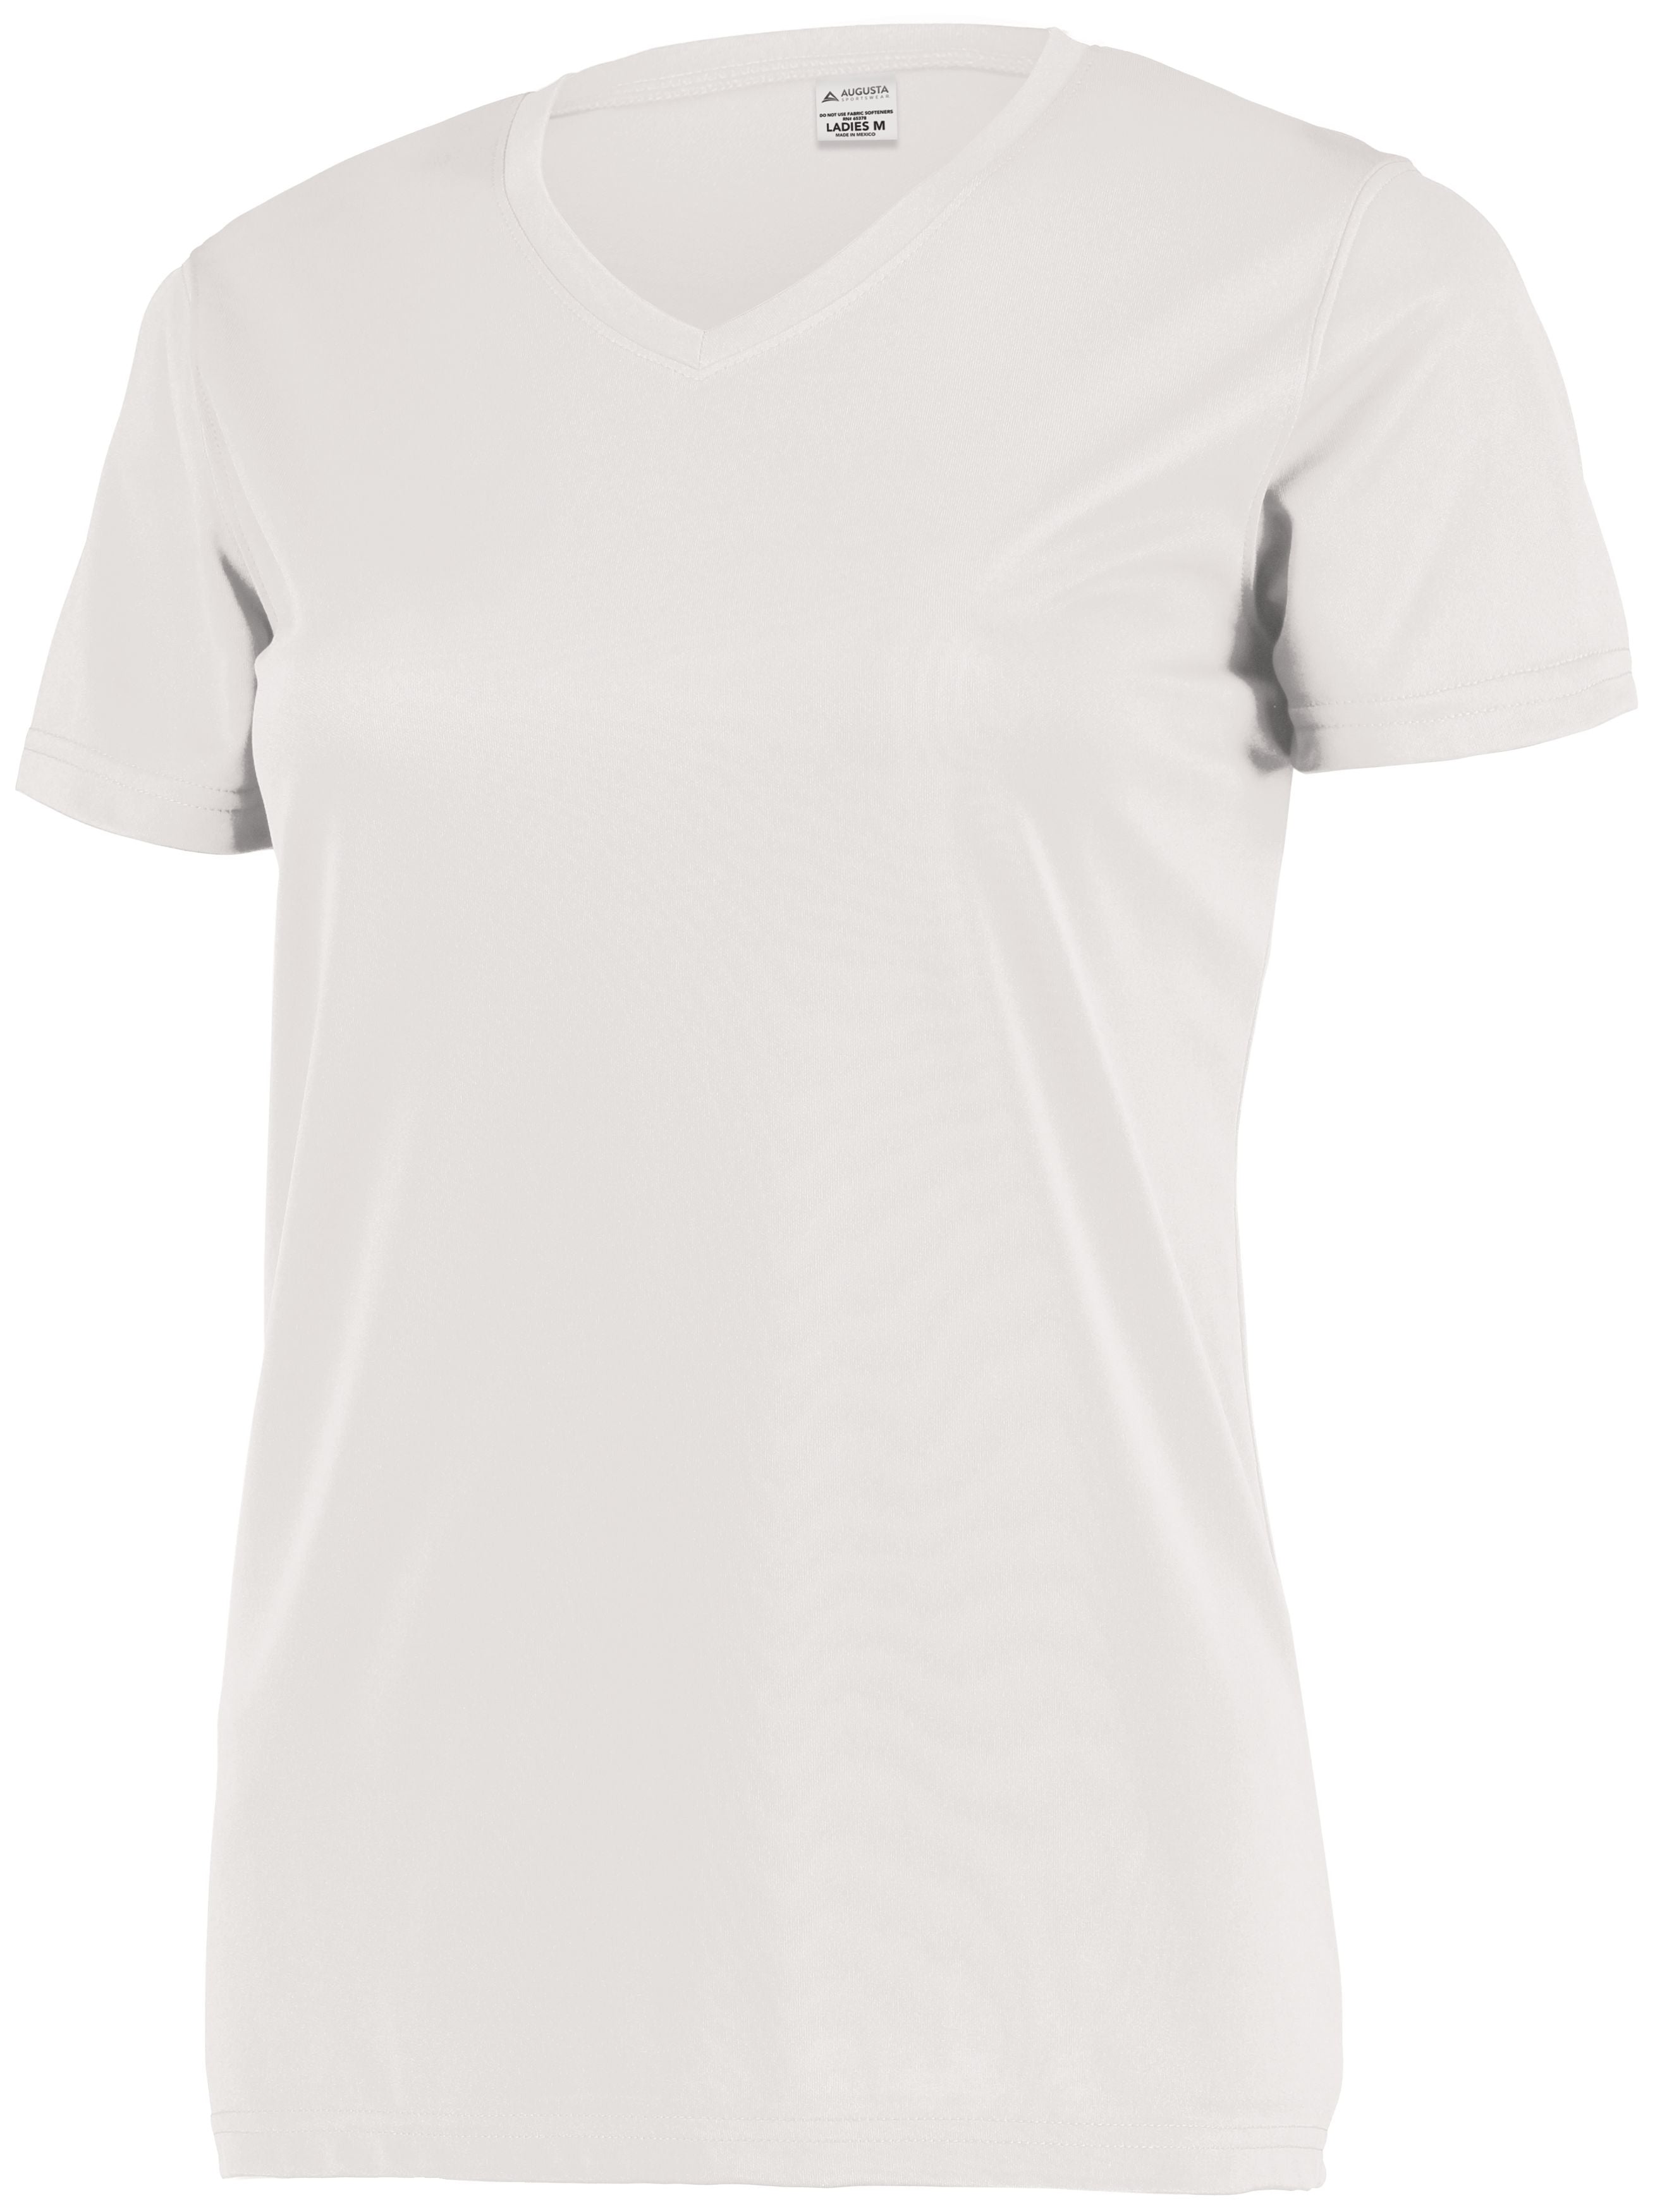 Augusta Sportswear Ladies Attain Wicking Set-In Sleeve Tee in White  -Part of the Ladies, Ladies-Tee-Shirt, T-Shirts, Augusta-Products, Shirts product lines at KanaleyCreations.com